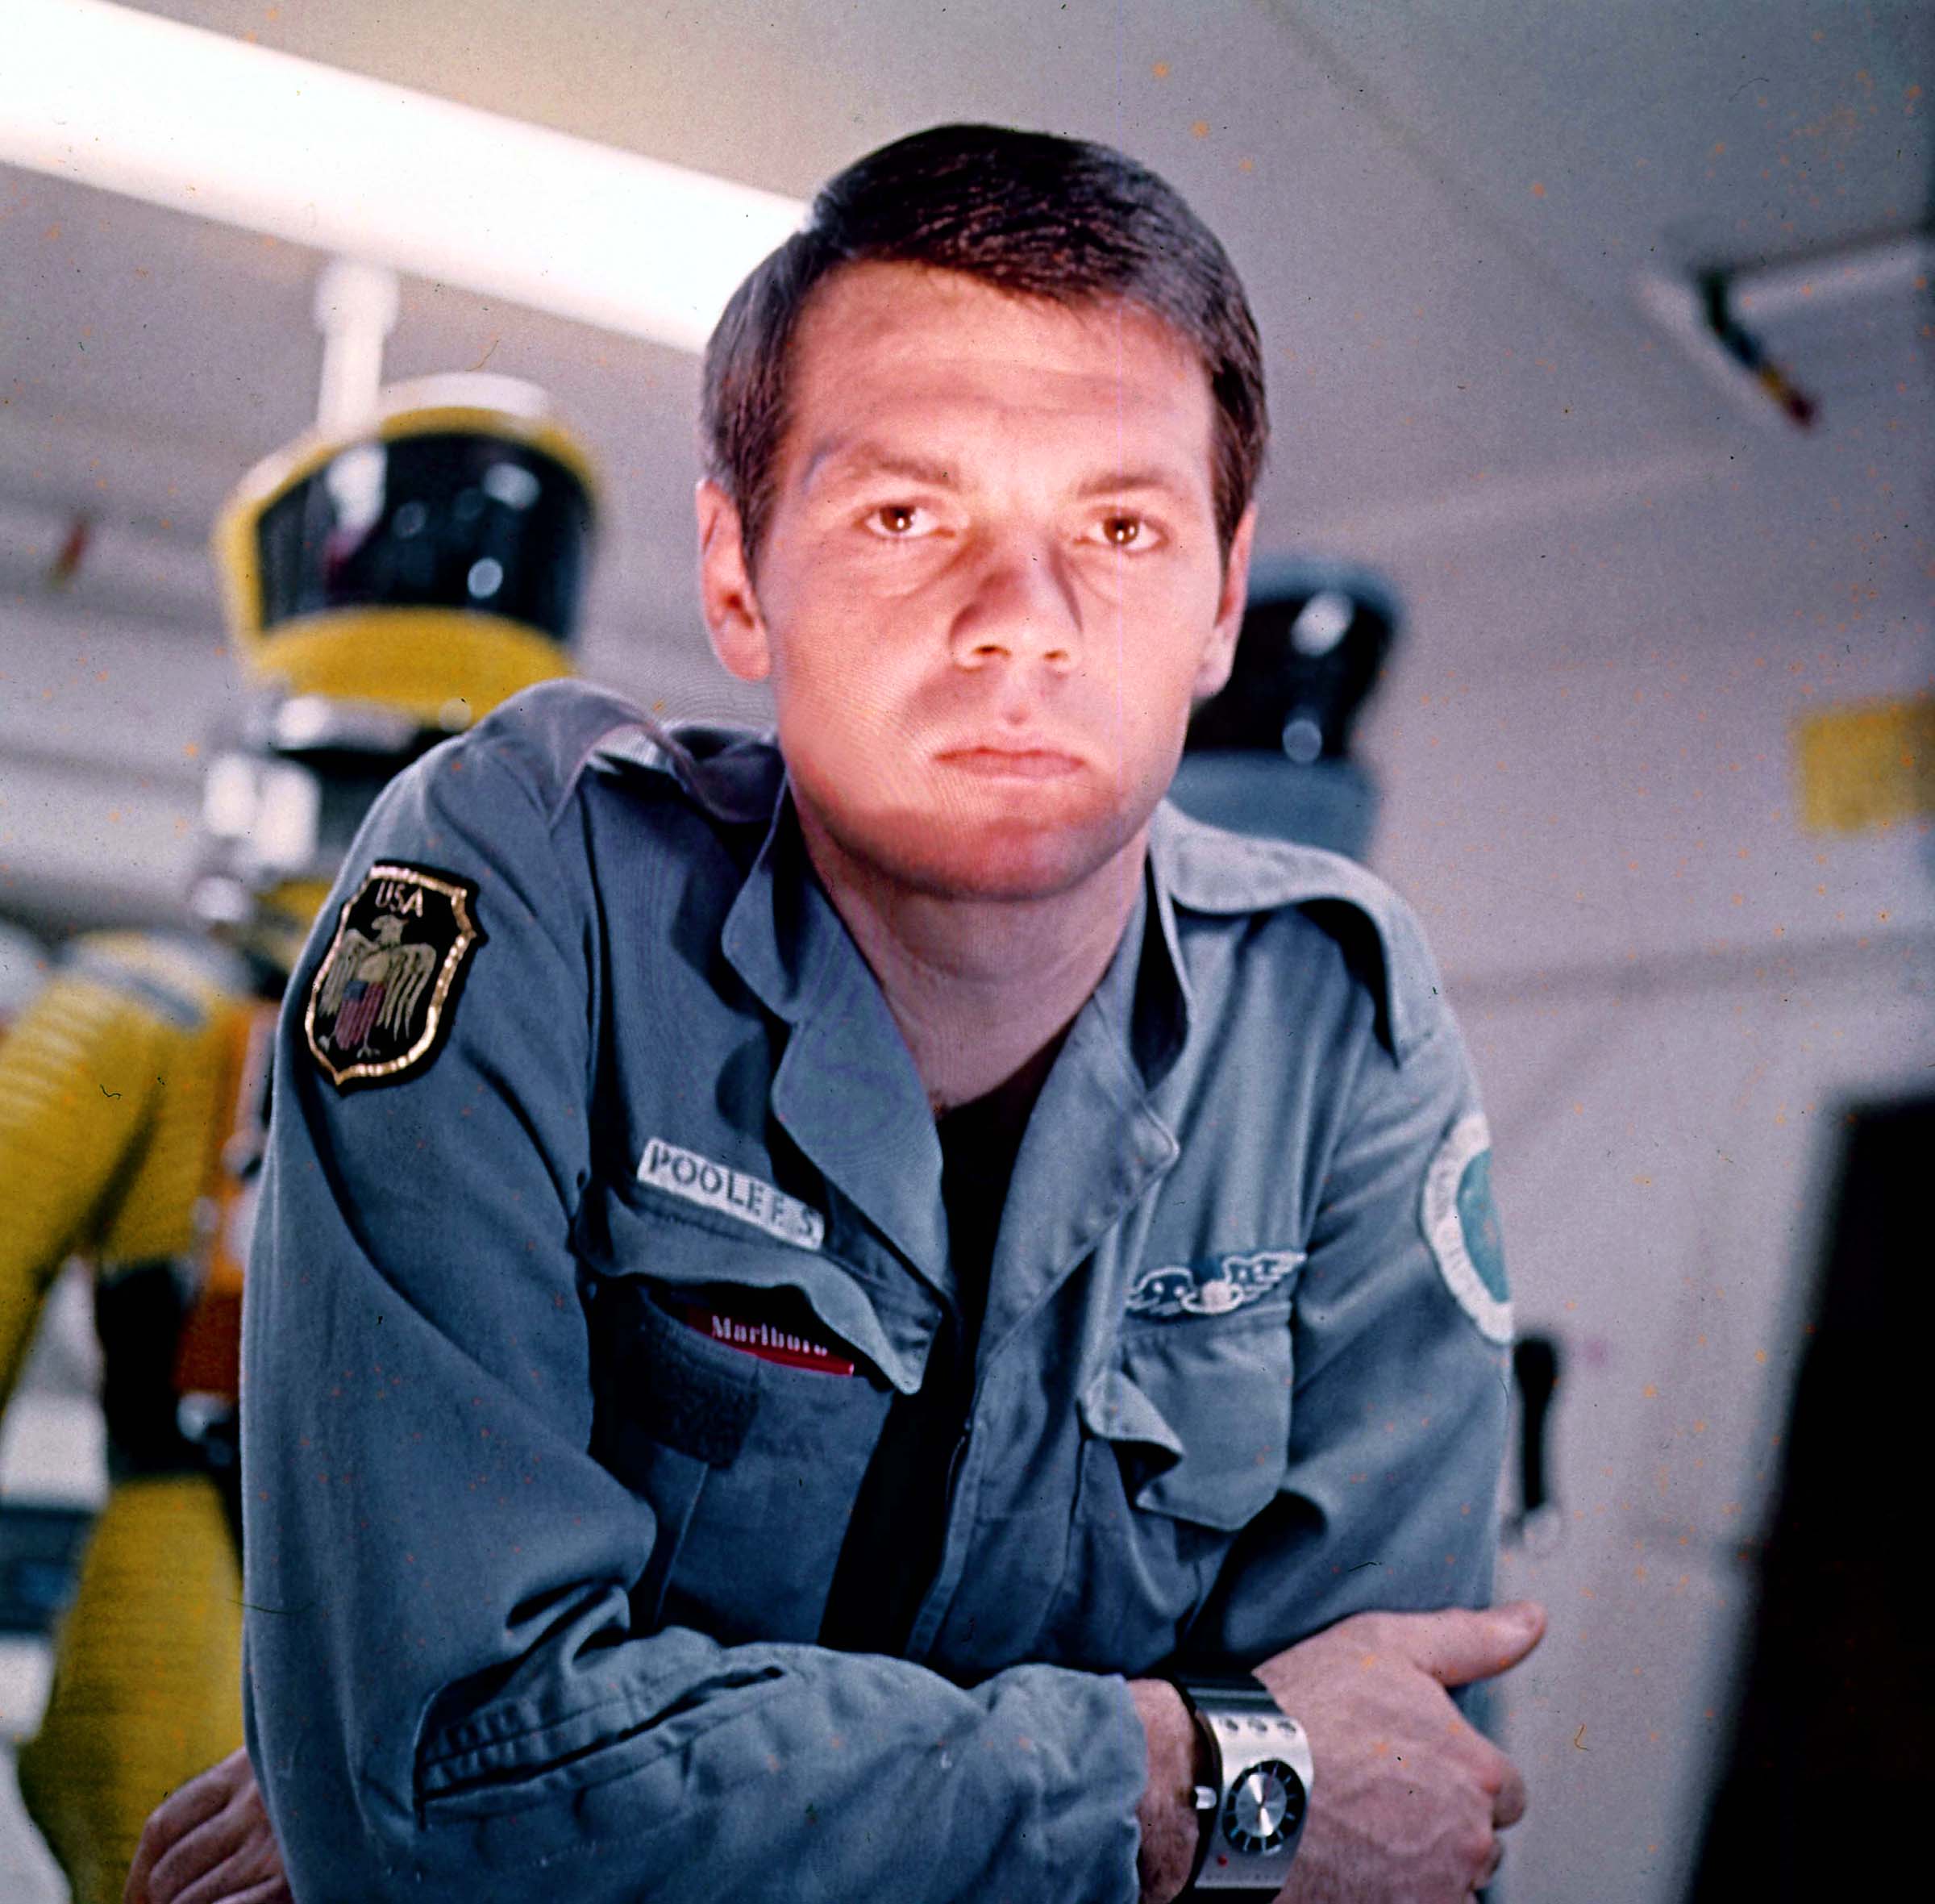 Lockwood as Dr. Frank Poole in "2001: A Space Odyssey" (MGM 1968)...